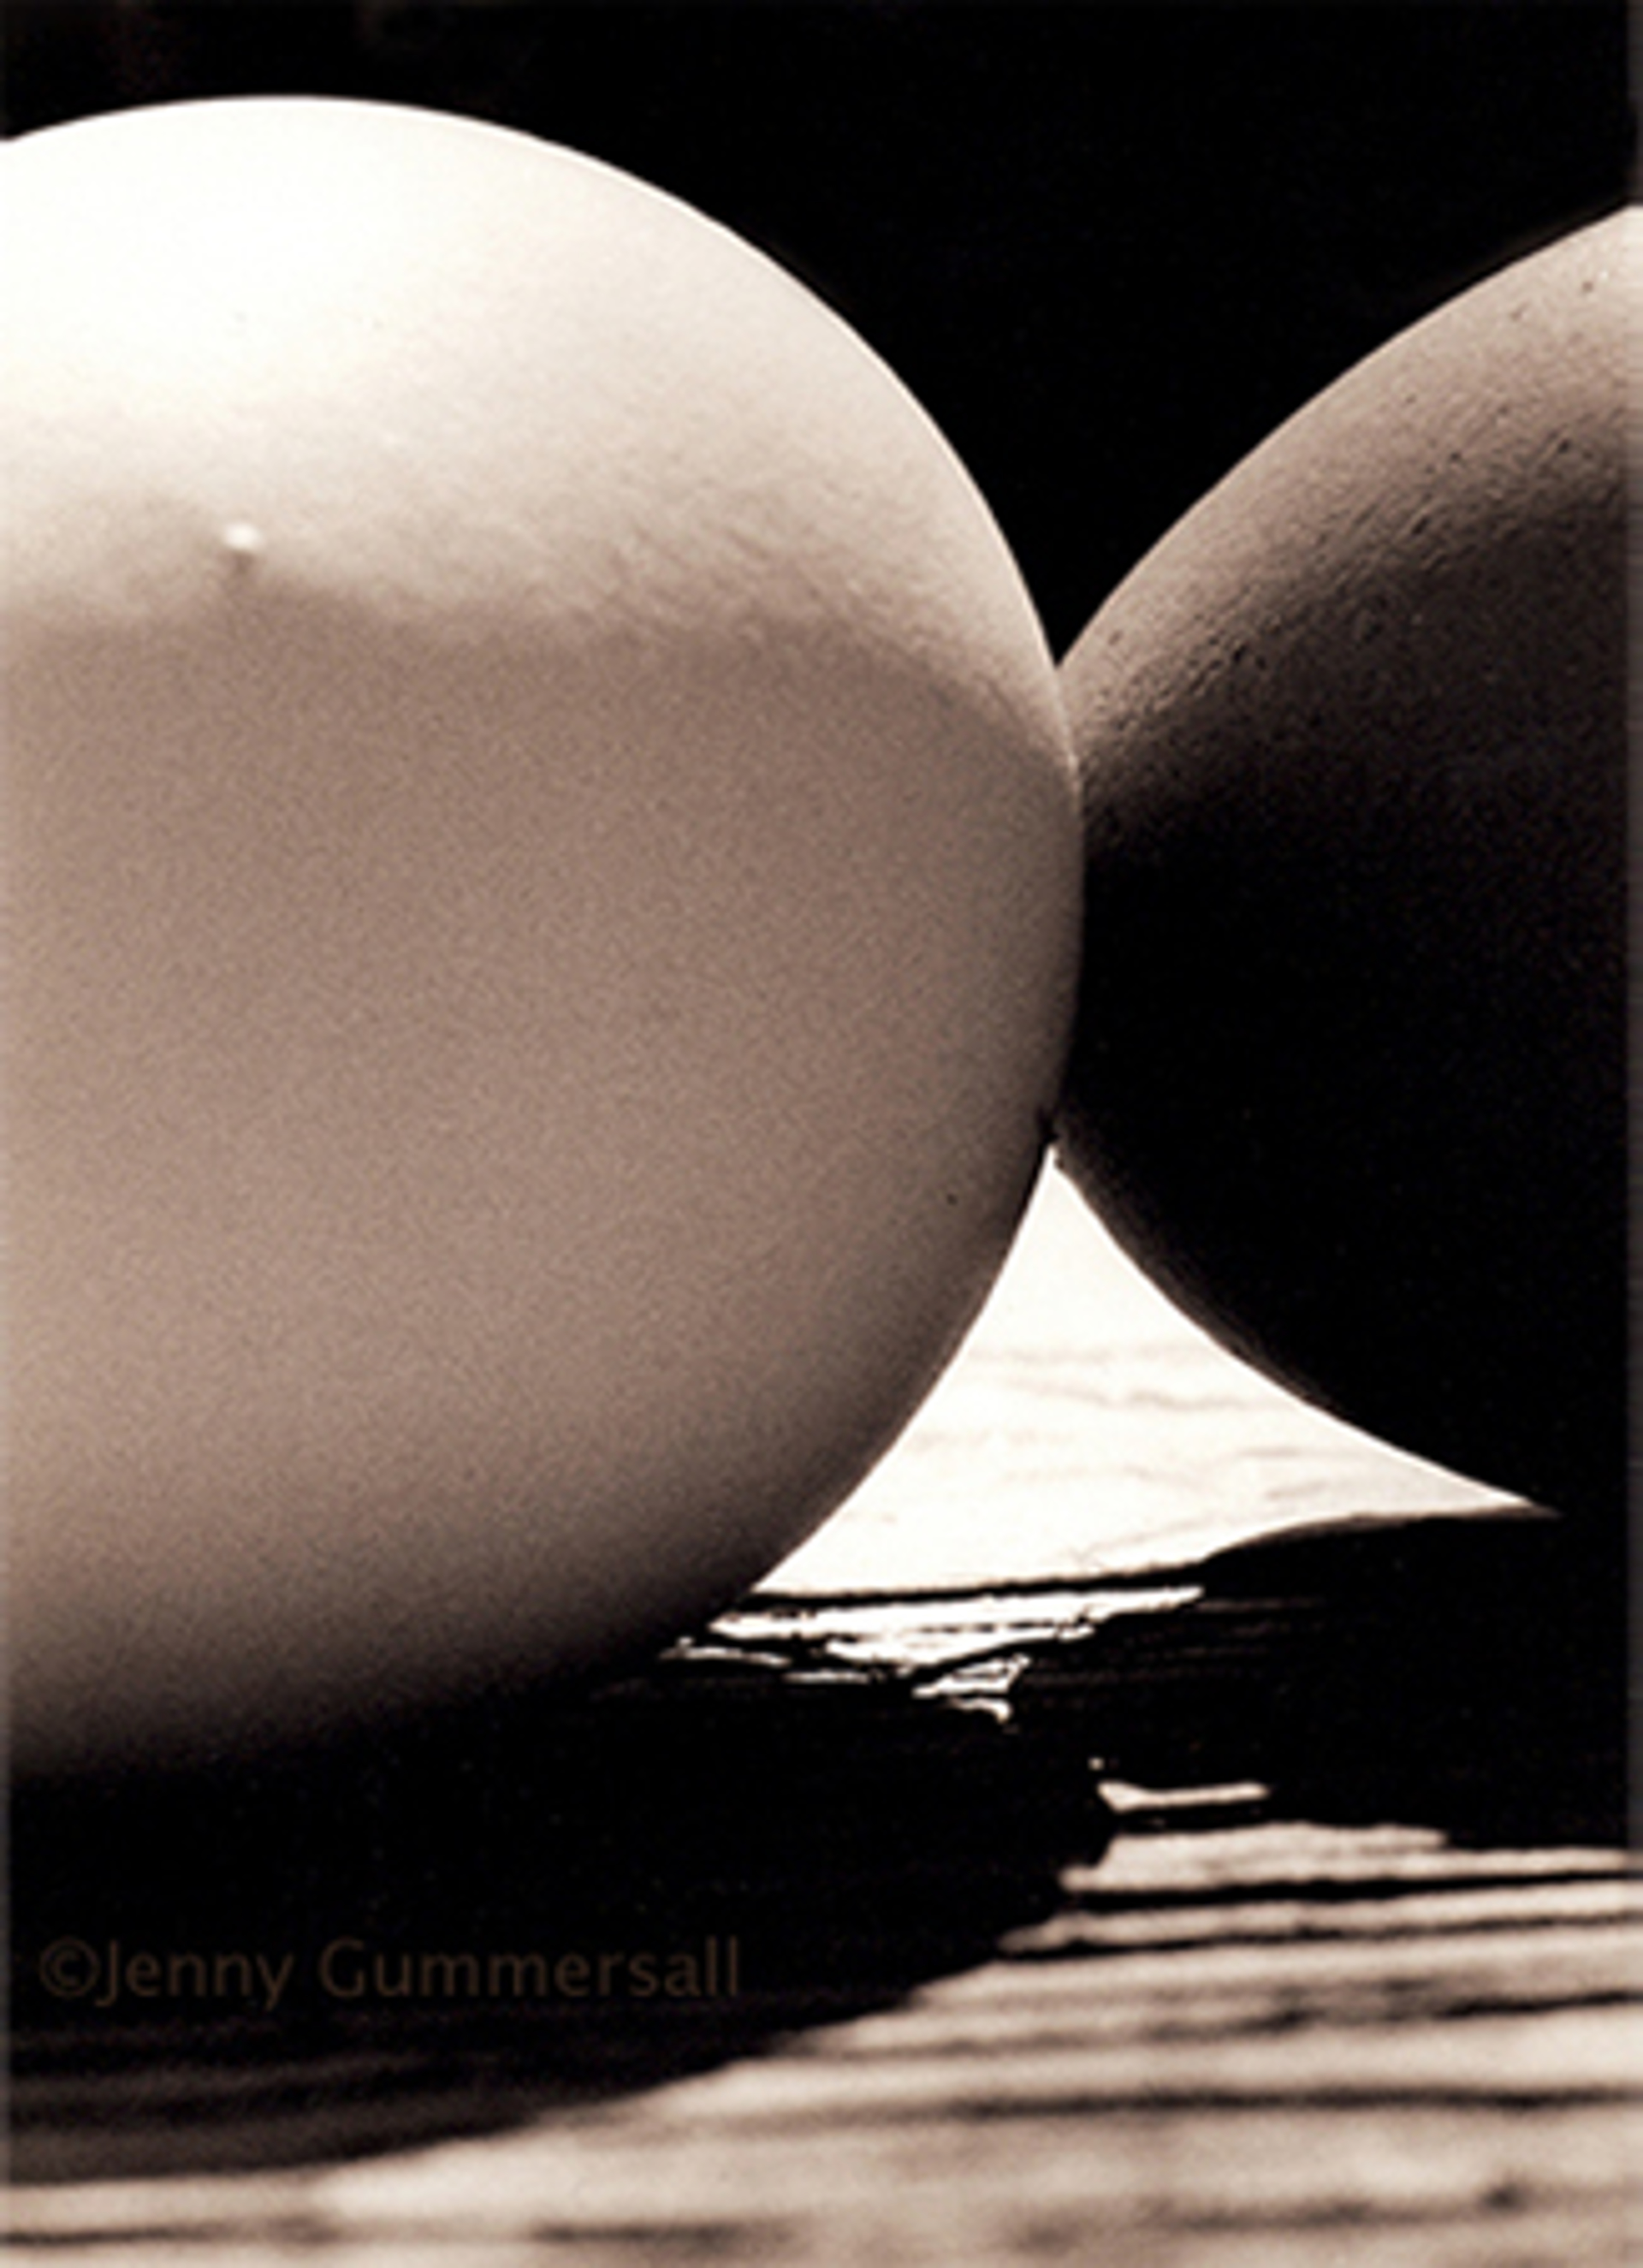 Two Eggs by Jenny Gummersall